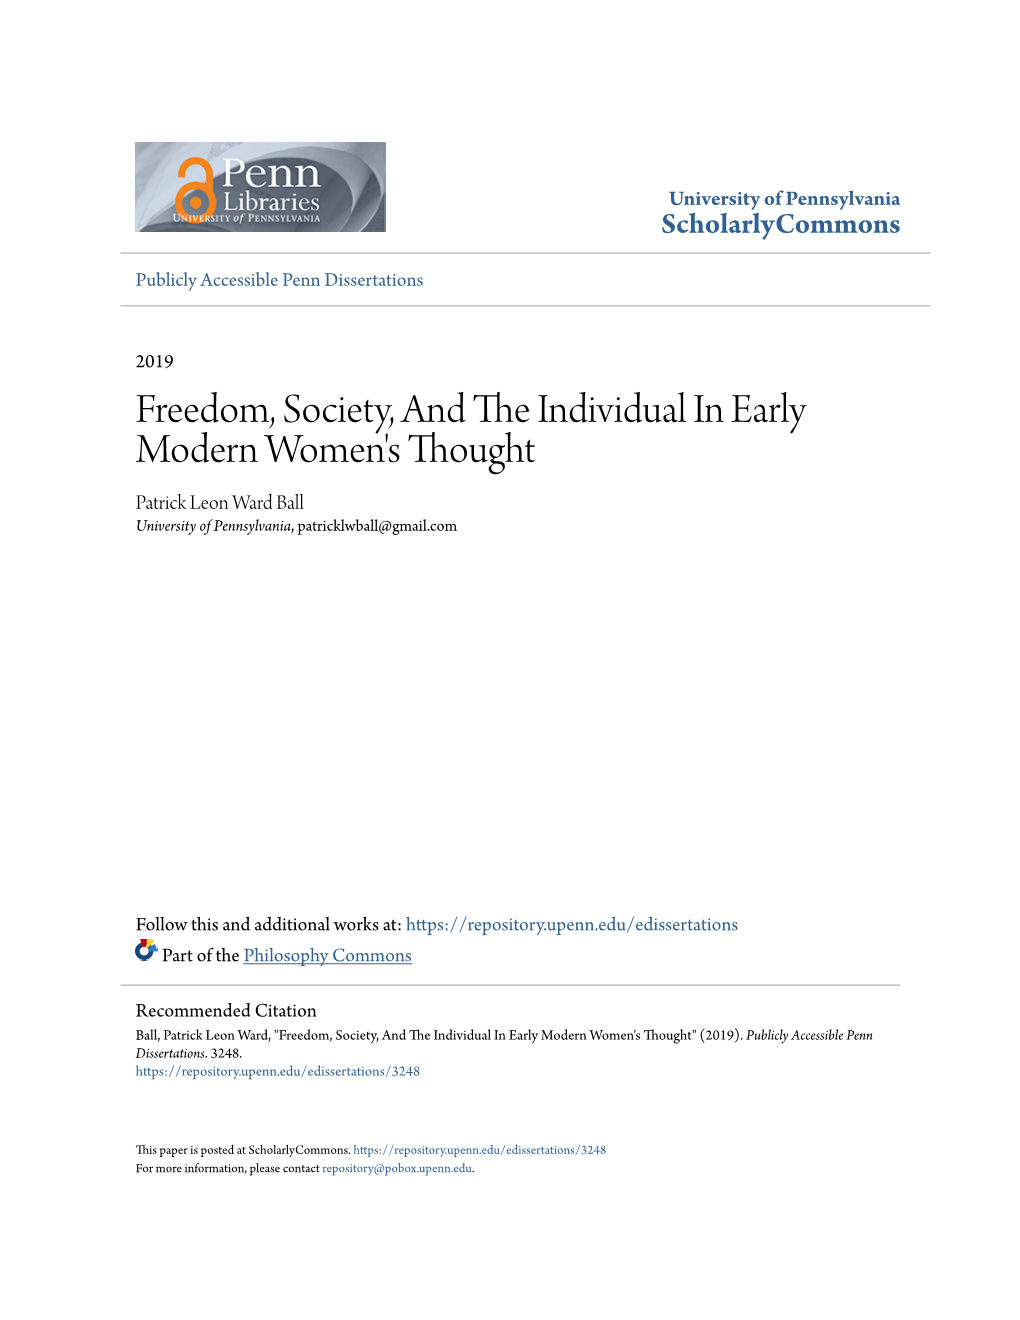 Freedom, Society, and the Individual in Early Modern Women's Thought